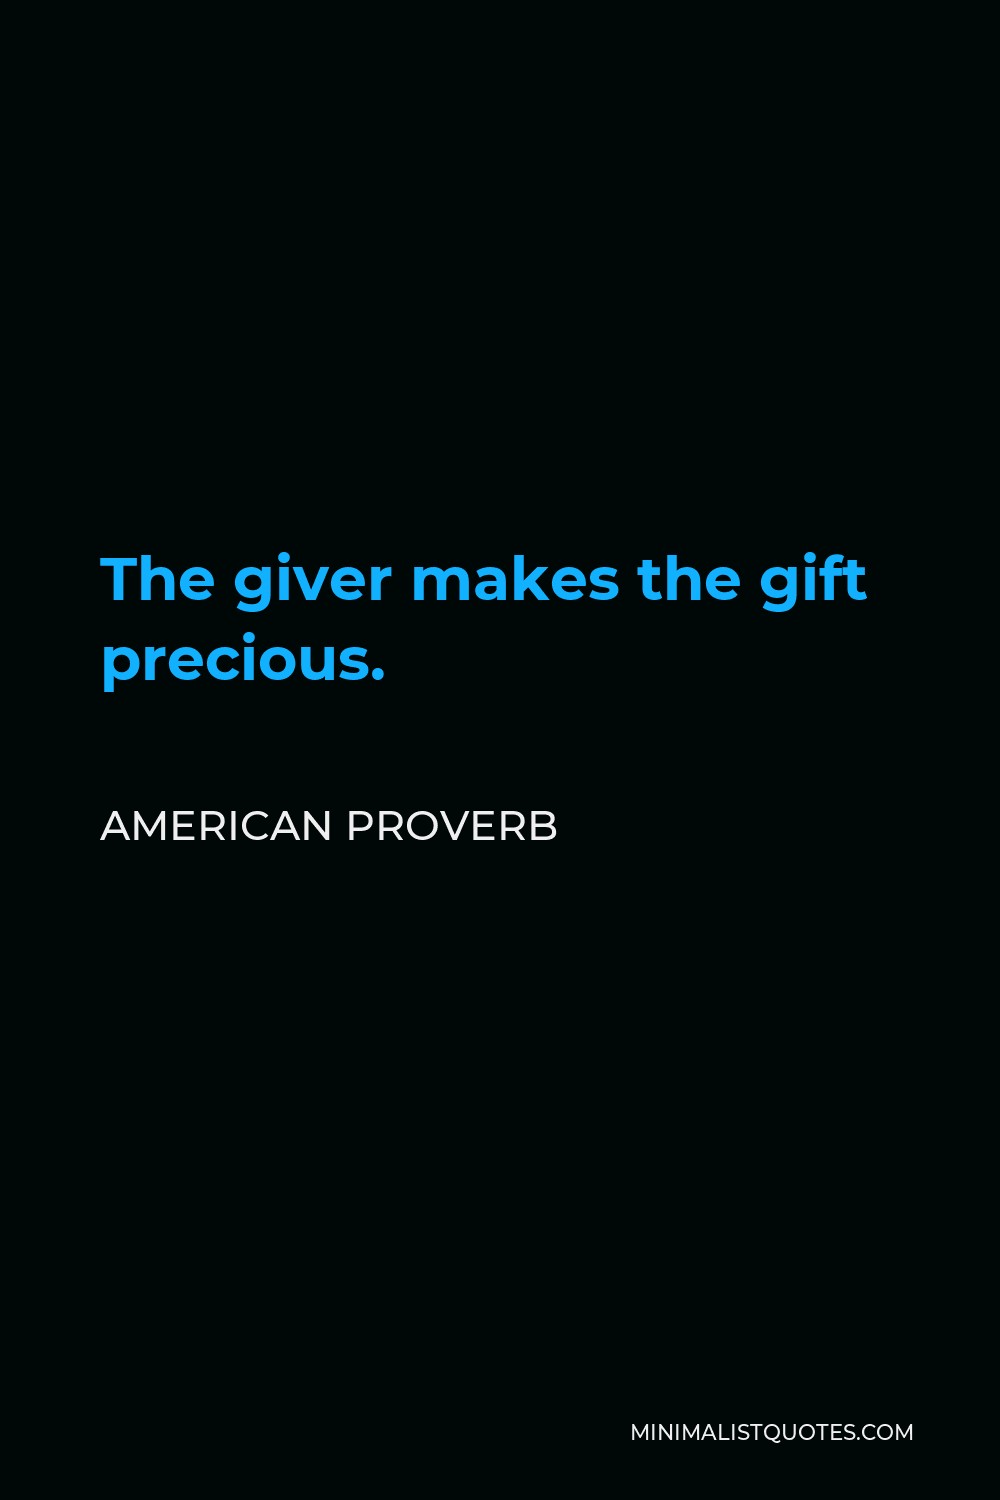 American Proverb Quote - The giver makes the gift precious.